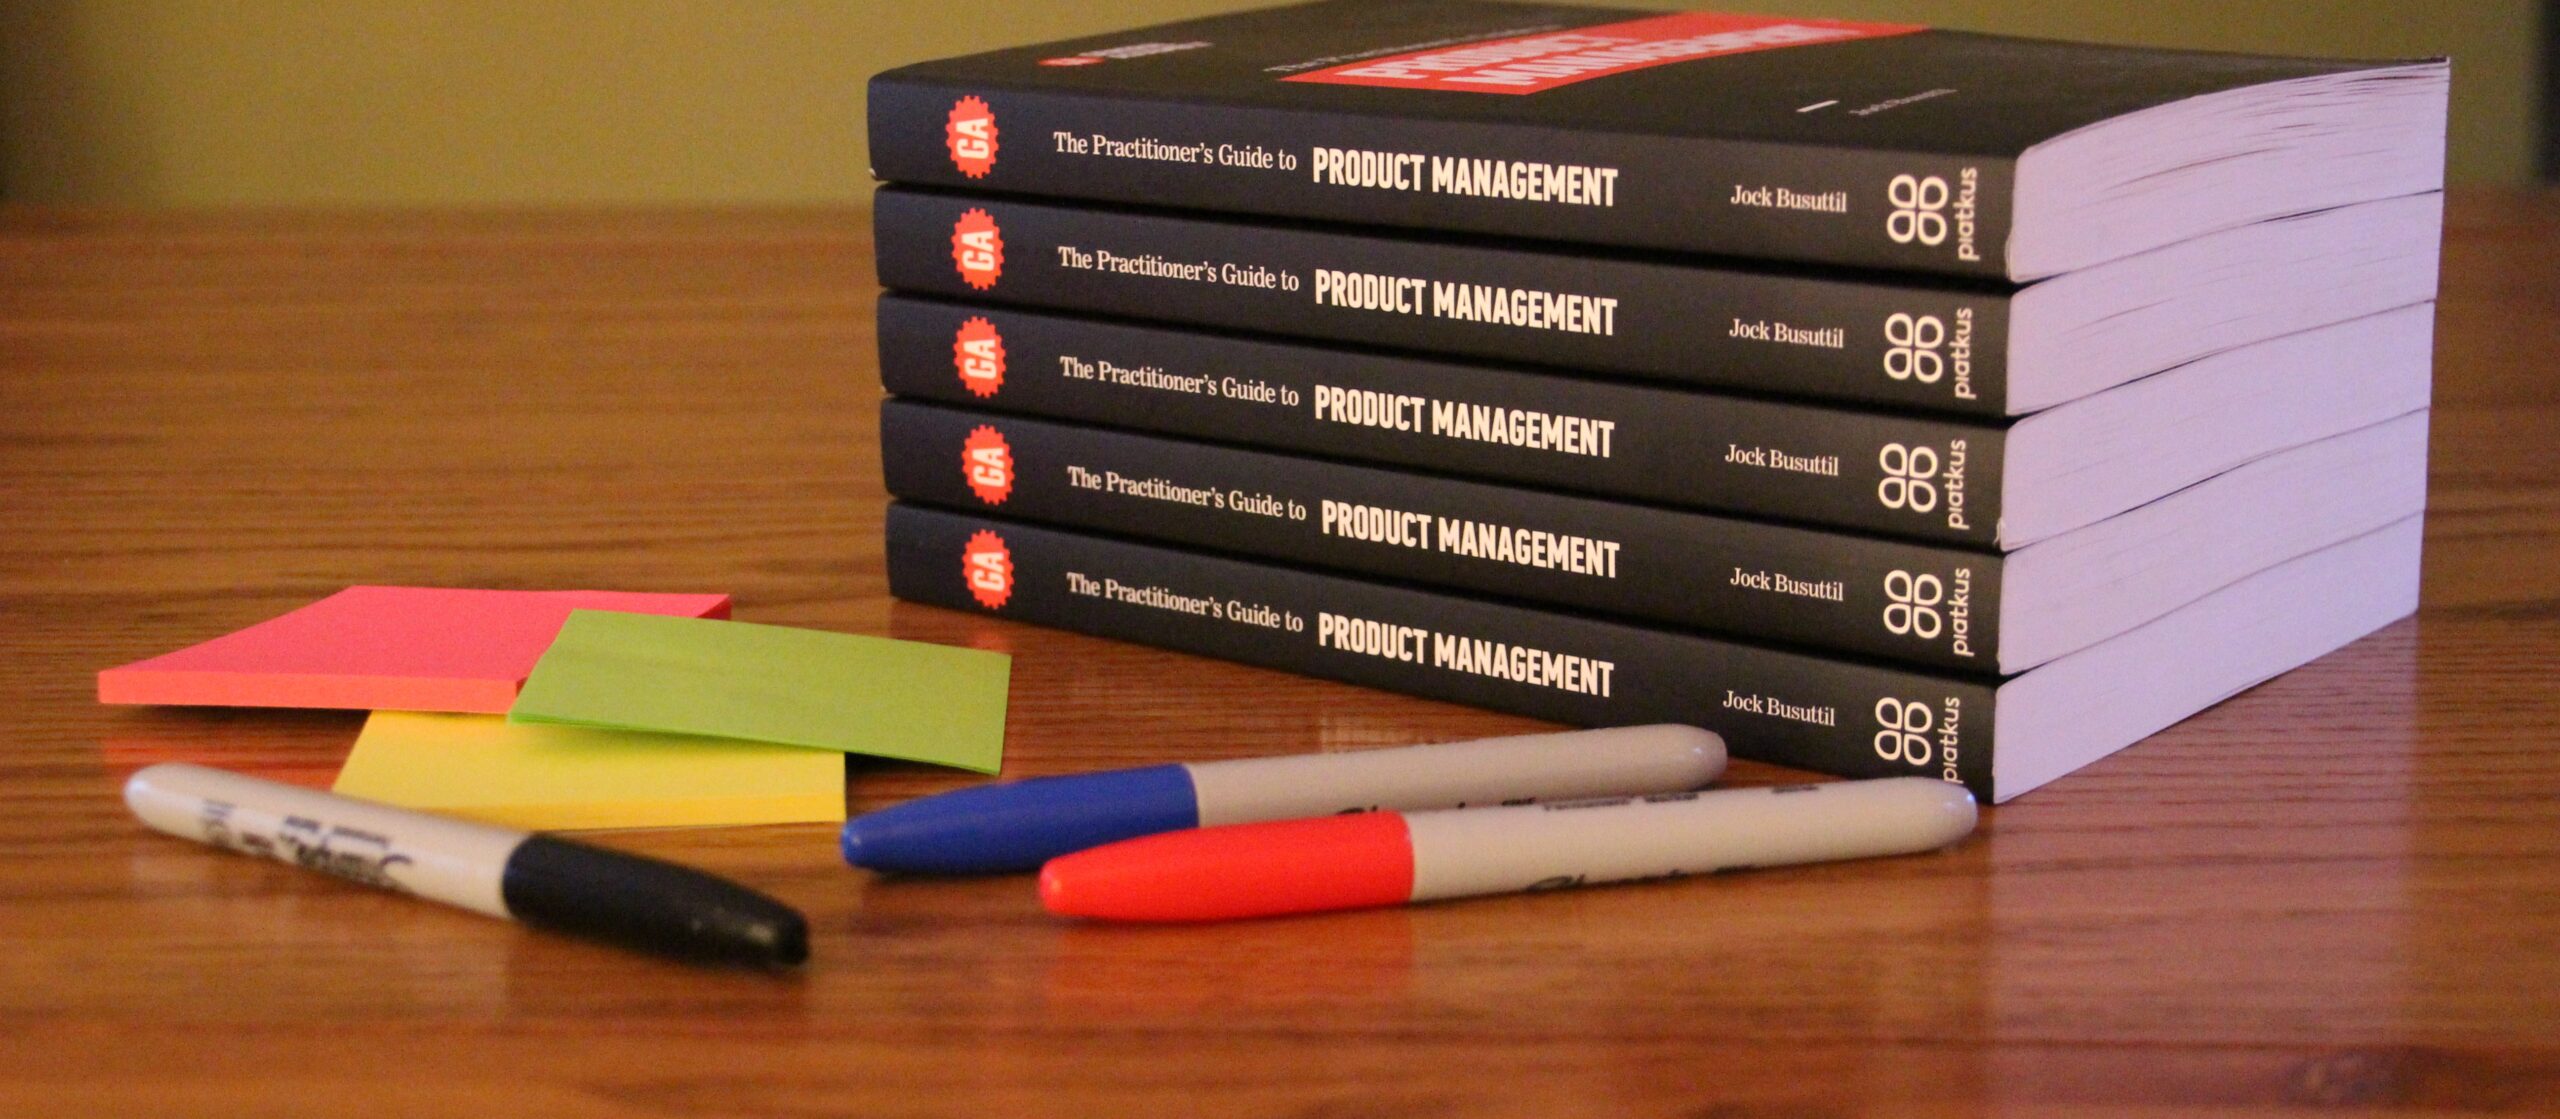 A pile of books "The Practitioner's Guide to Product Management" sits on a table next to some colourful sticky notes and Sharpie pens (Photo by Jock Busuttil / Product People Limited)